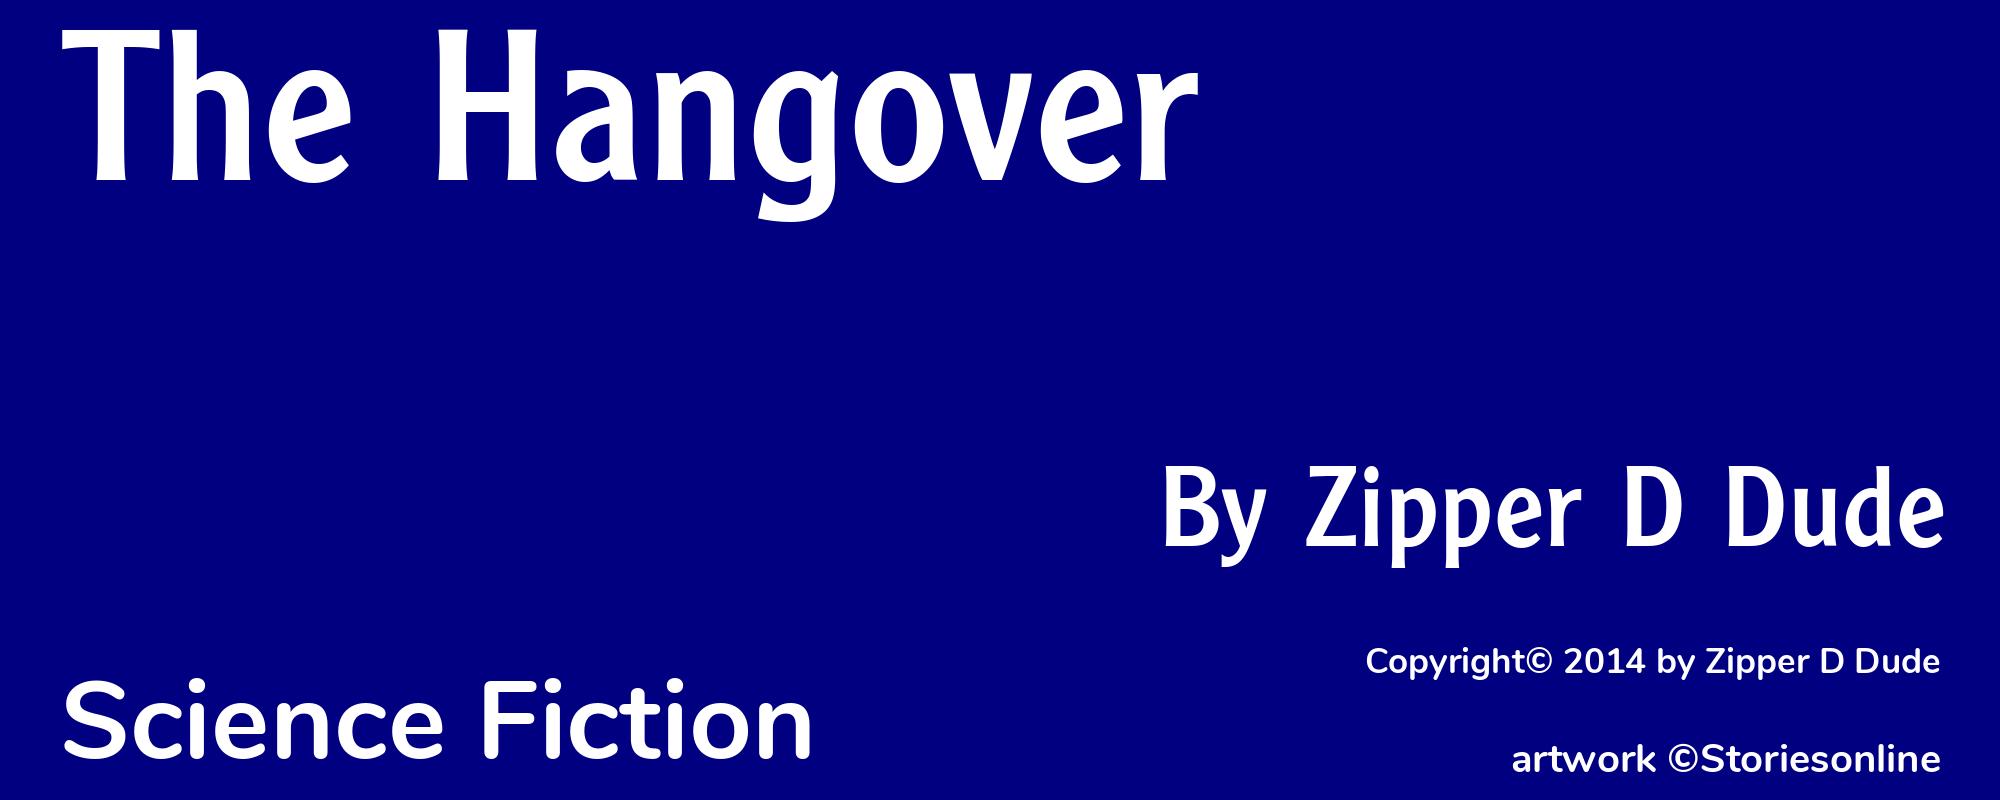 The Hangover - Cover